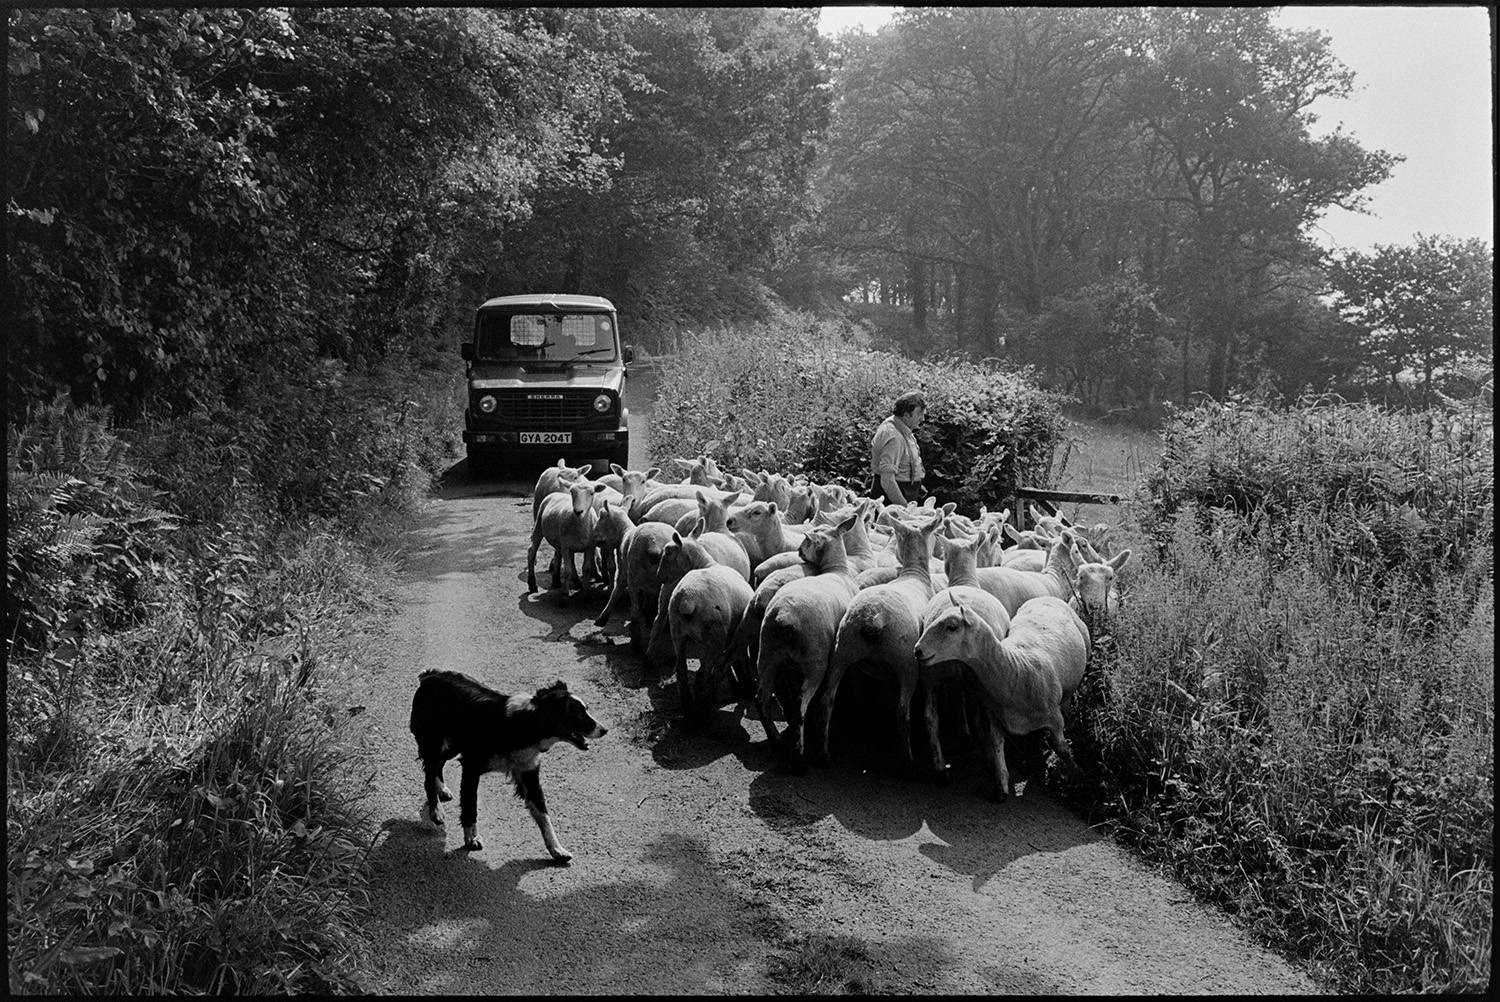 Sheep going down sunny road. 
[A man and a dog herding sheep into a field from a lane near Kingscott. A truck is waiting in the lane and trees can be seen in the background.]